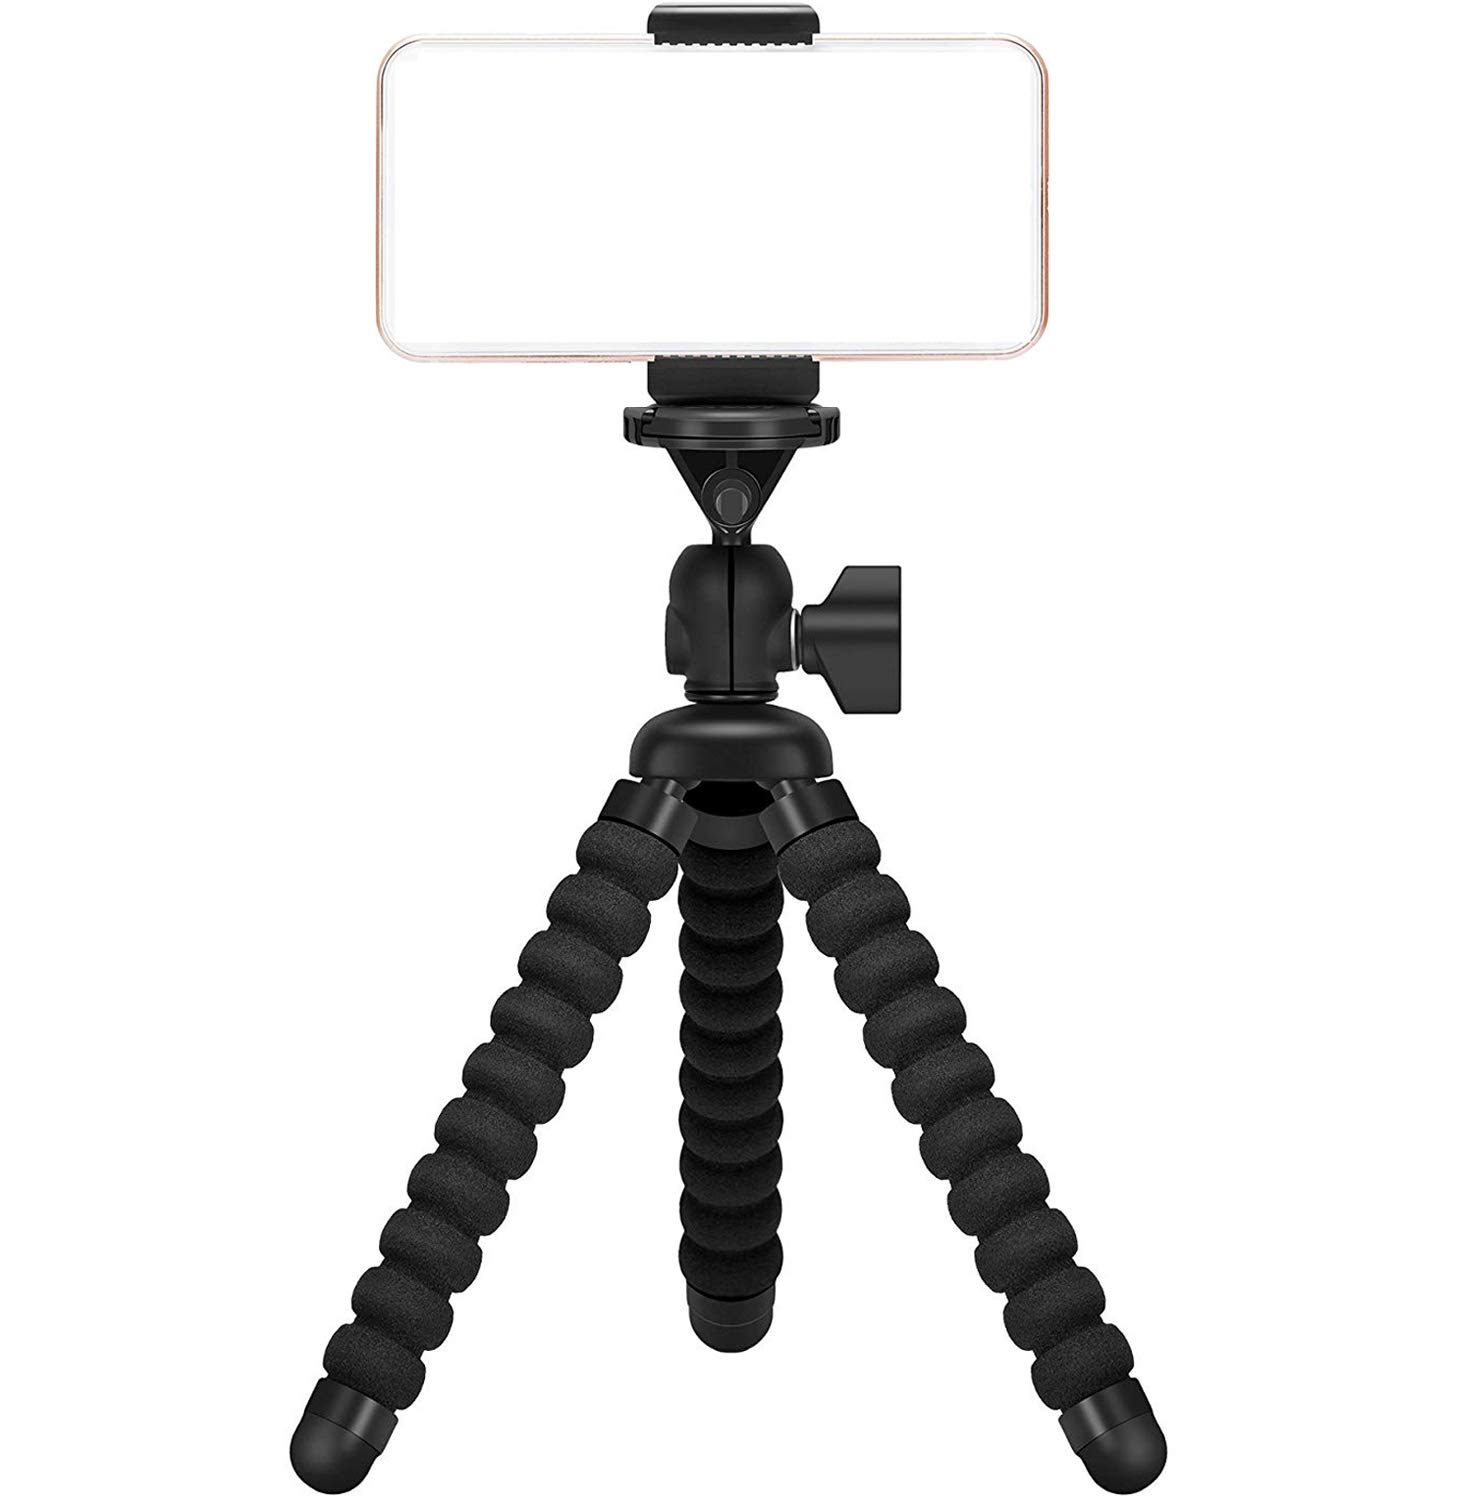 Why Vloggers Prefer Selfie Stick Over Tripods; Amazon Top Tripods and Selfie Sticks 